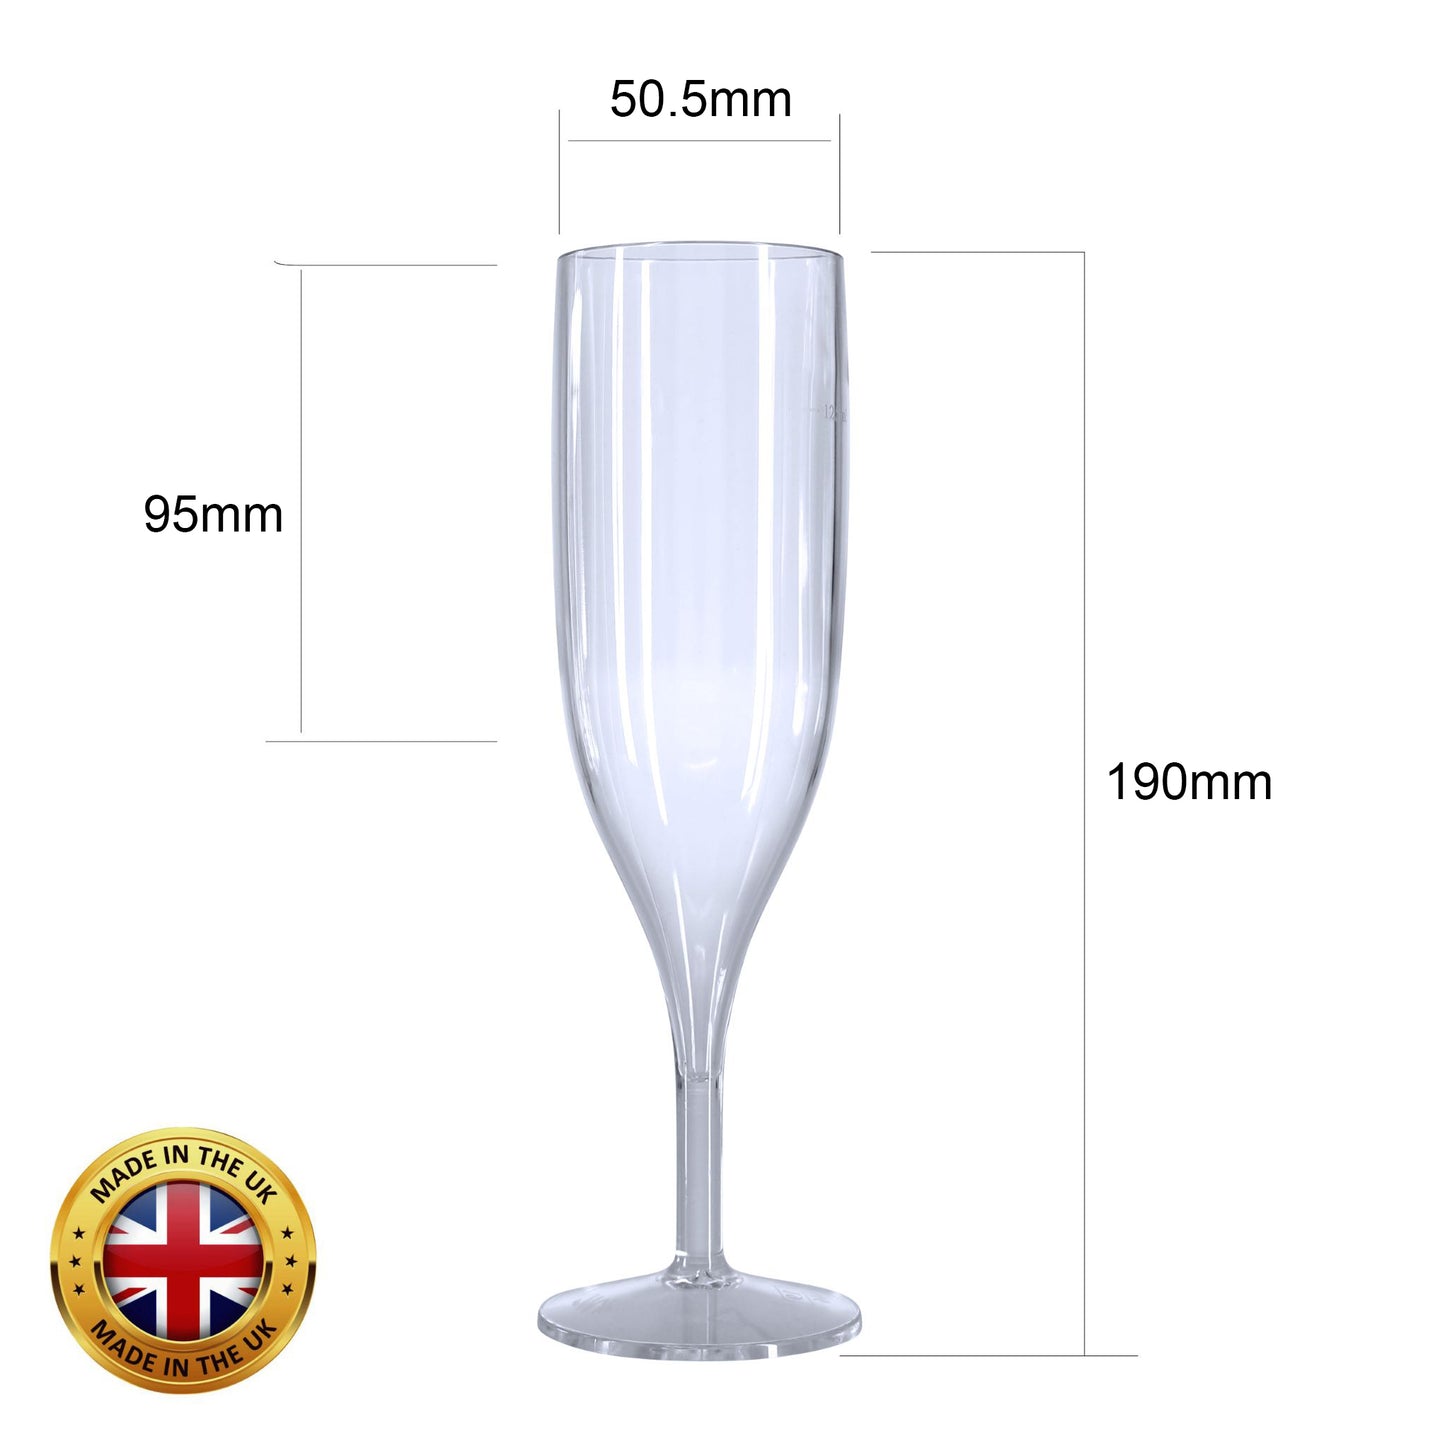 25 x Clear Prosecco Flutes – 175ml CE 125ml marked, made from Strong Reusable Plastic in glossy Transparent 1-Piece Champagne Glass Pack-5056020186977-EY-PP-130-Product Pro-Clear Champagne Flutes, Clear Flutes, Clear Prosecco Flutes, Reusable Flutes